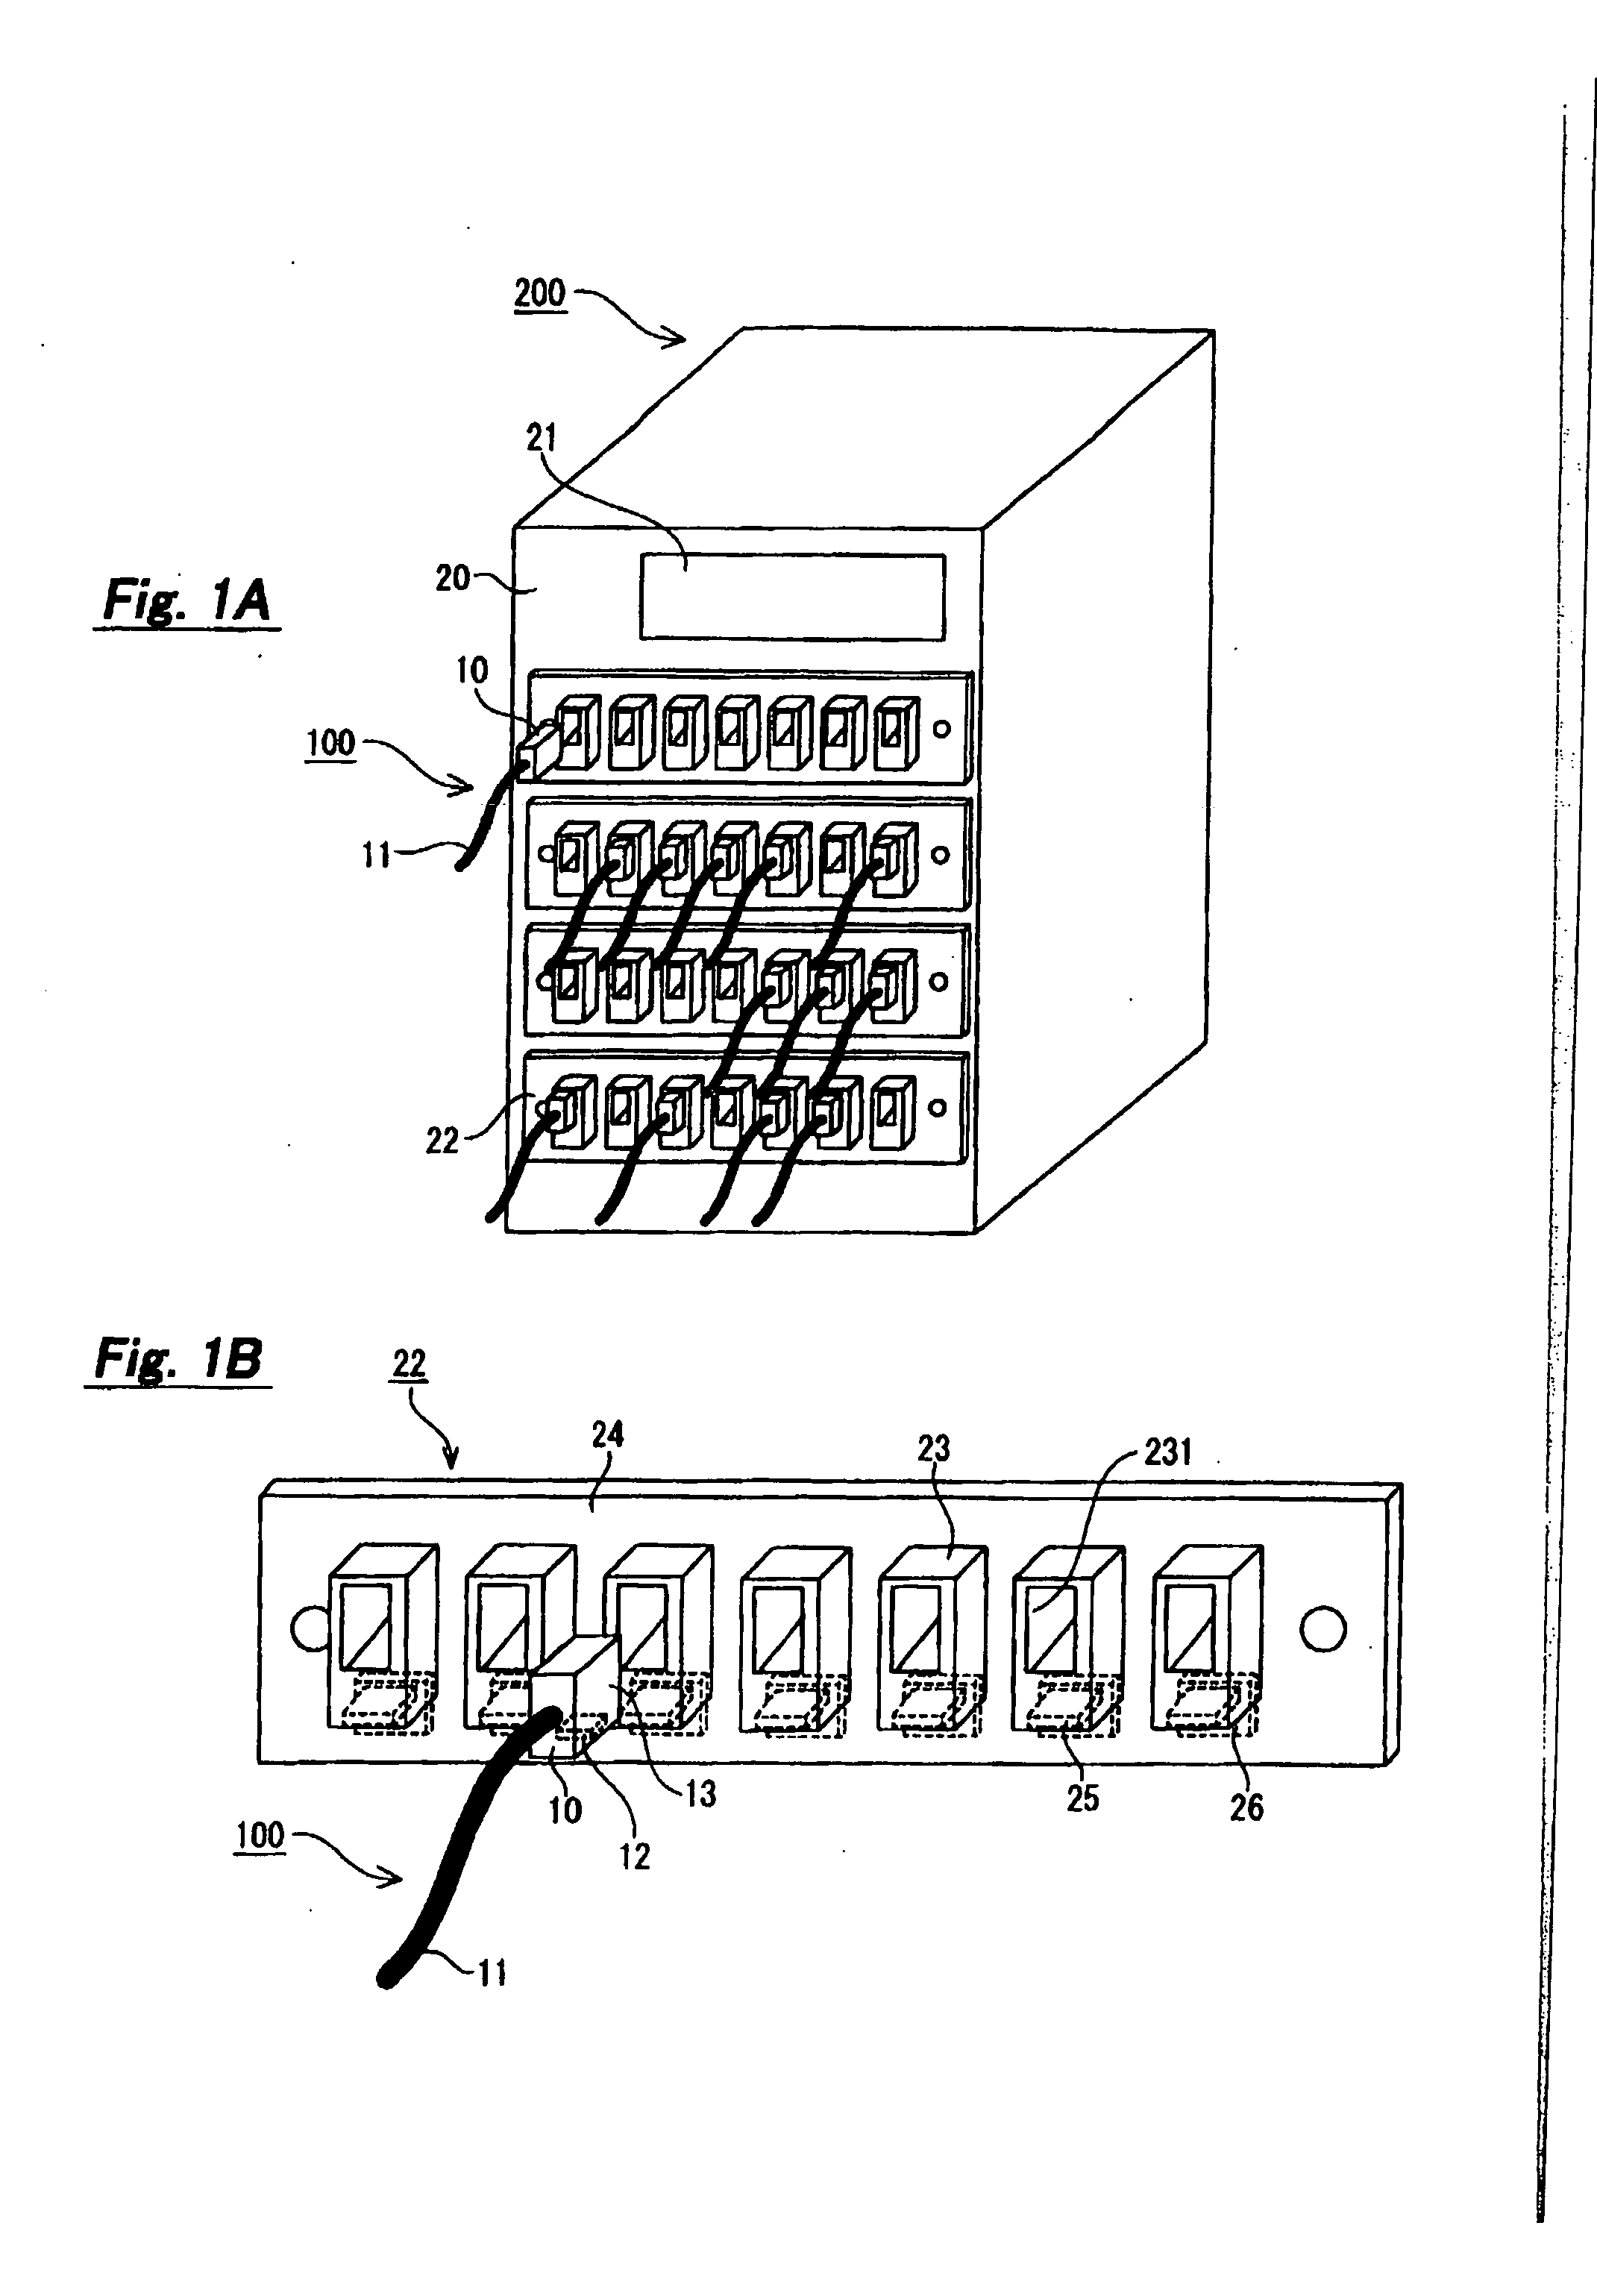 Adapter panel, electronic equipment, and cable connector identification system